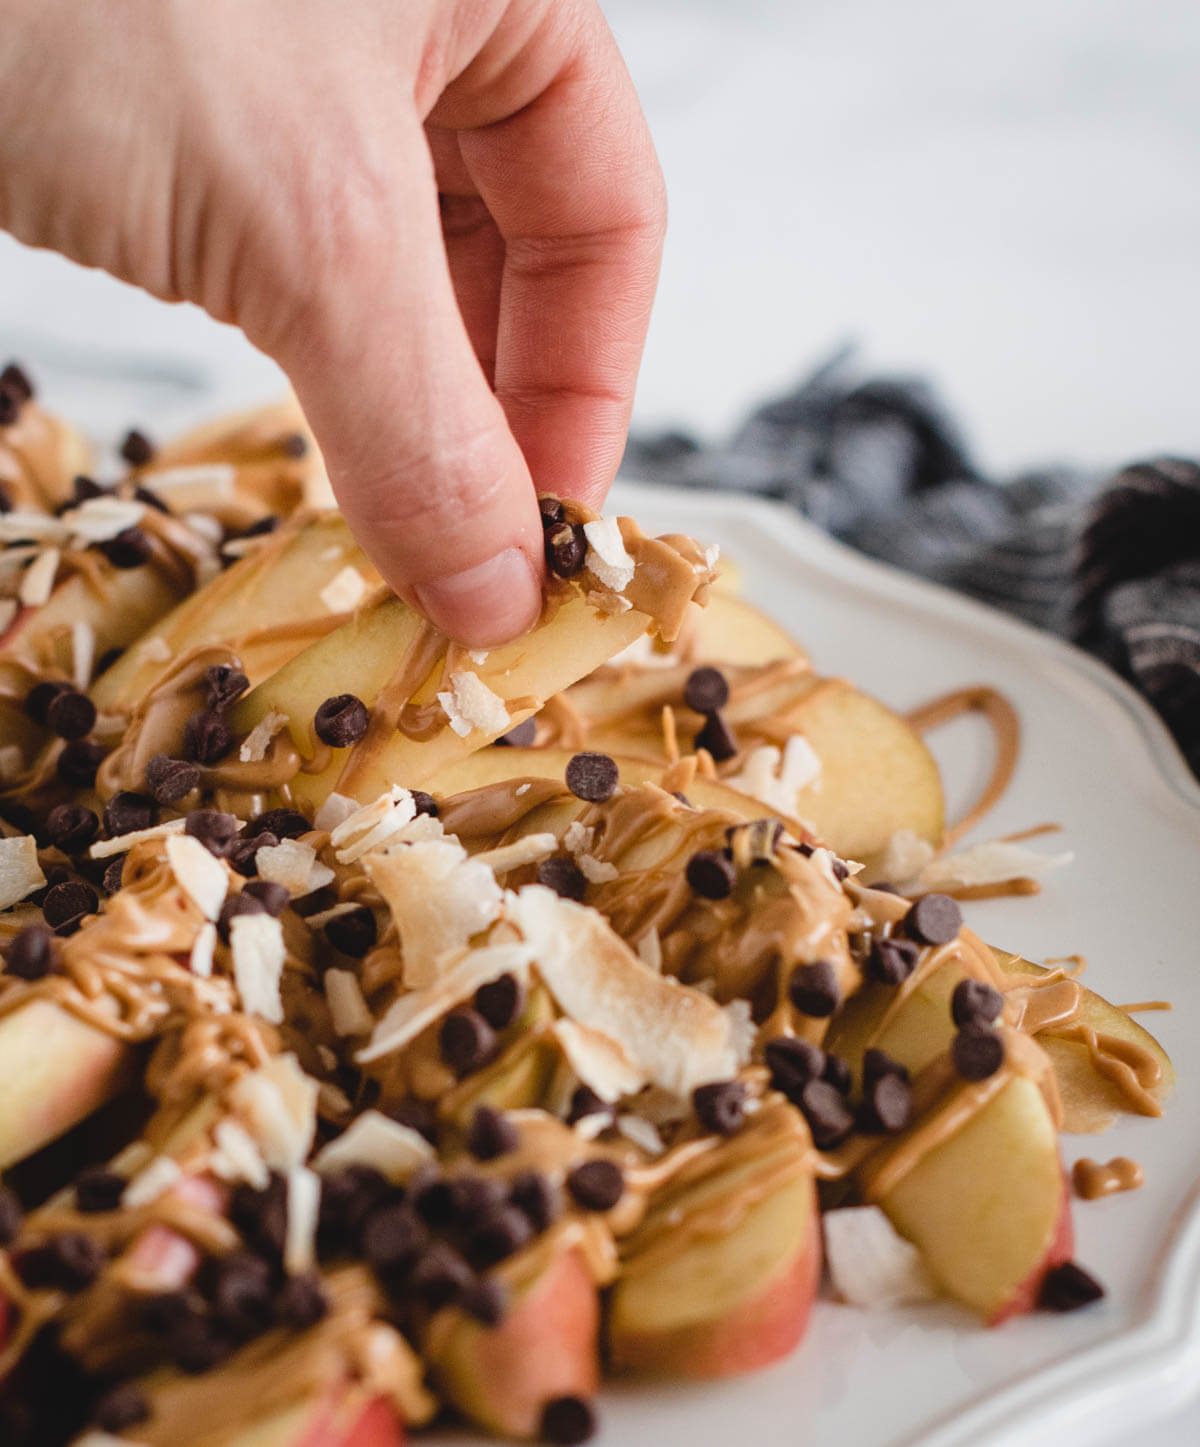 A hand picking up a slice of apple drizzled with peanut butter and chocolate chips